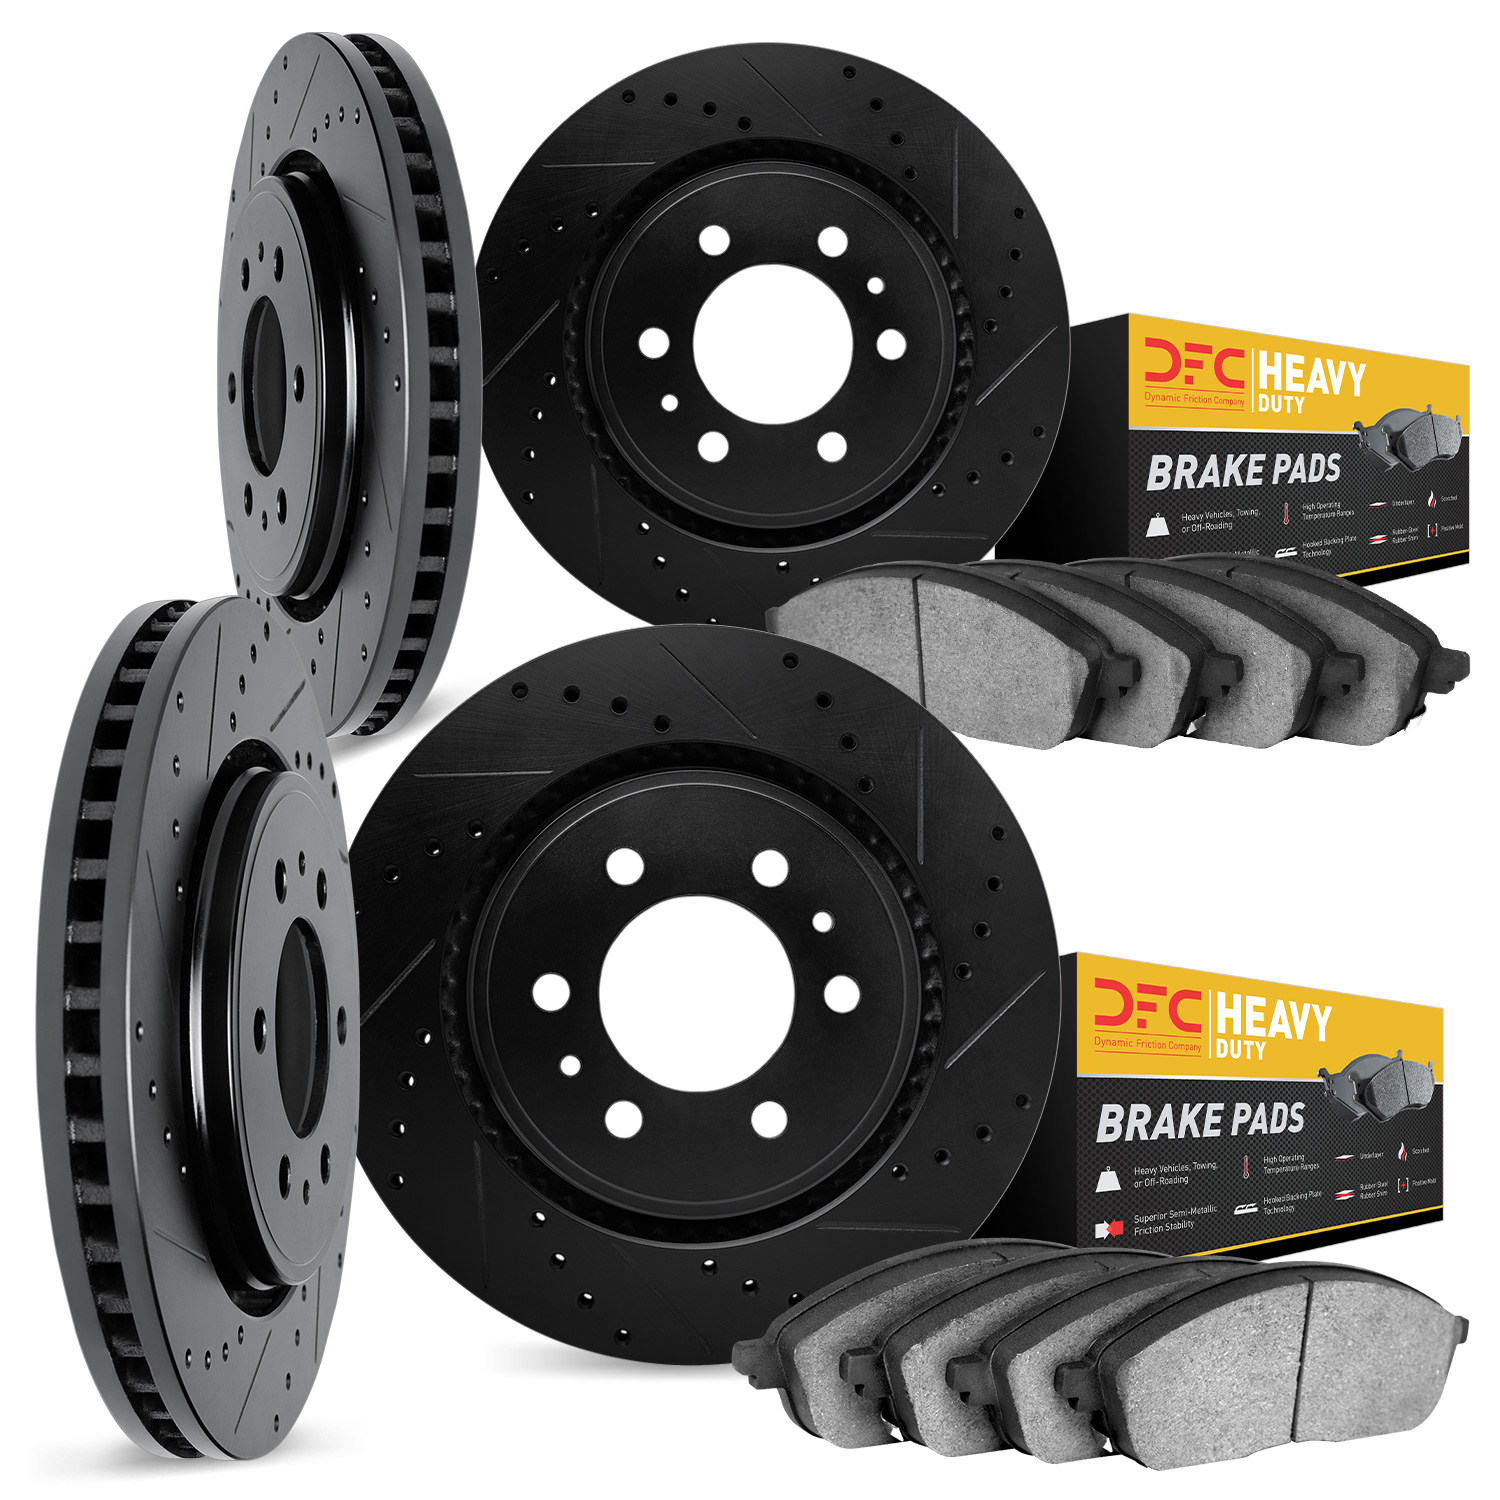 8204-44001 Drilled/Slotted Rotors w/Heavy-Duty Brake Pads Kit [Silver], 1996-2006 Mopar, Position: Front and Rear